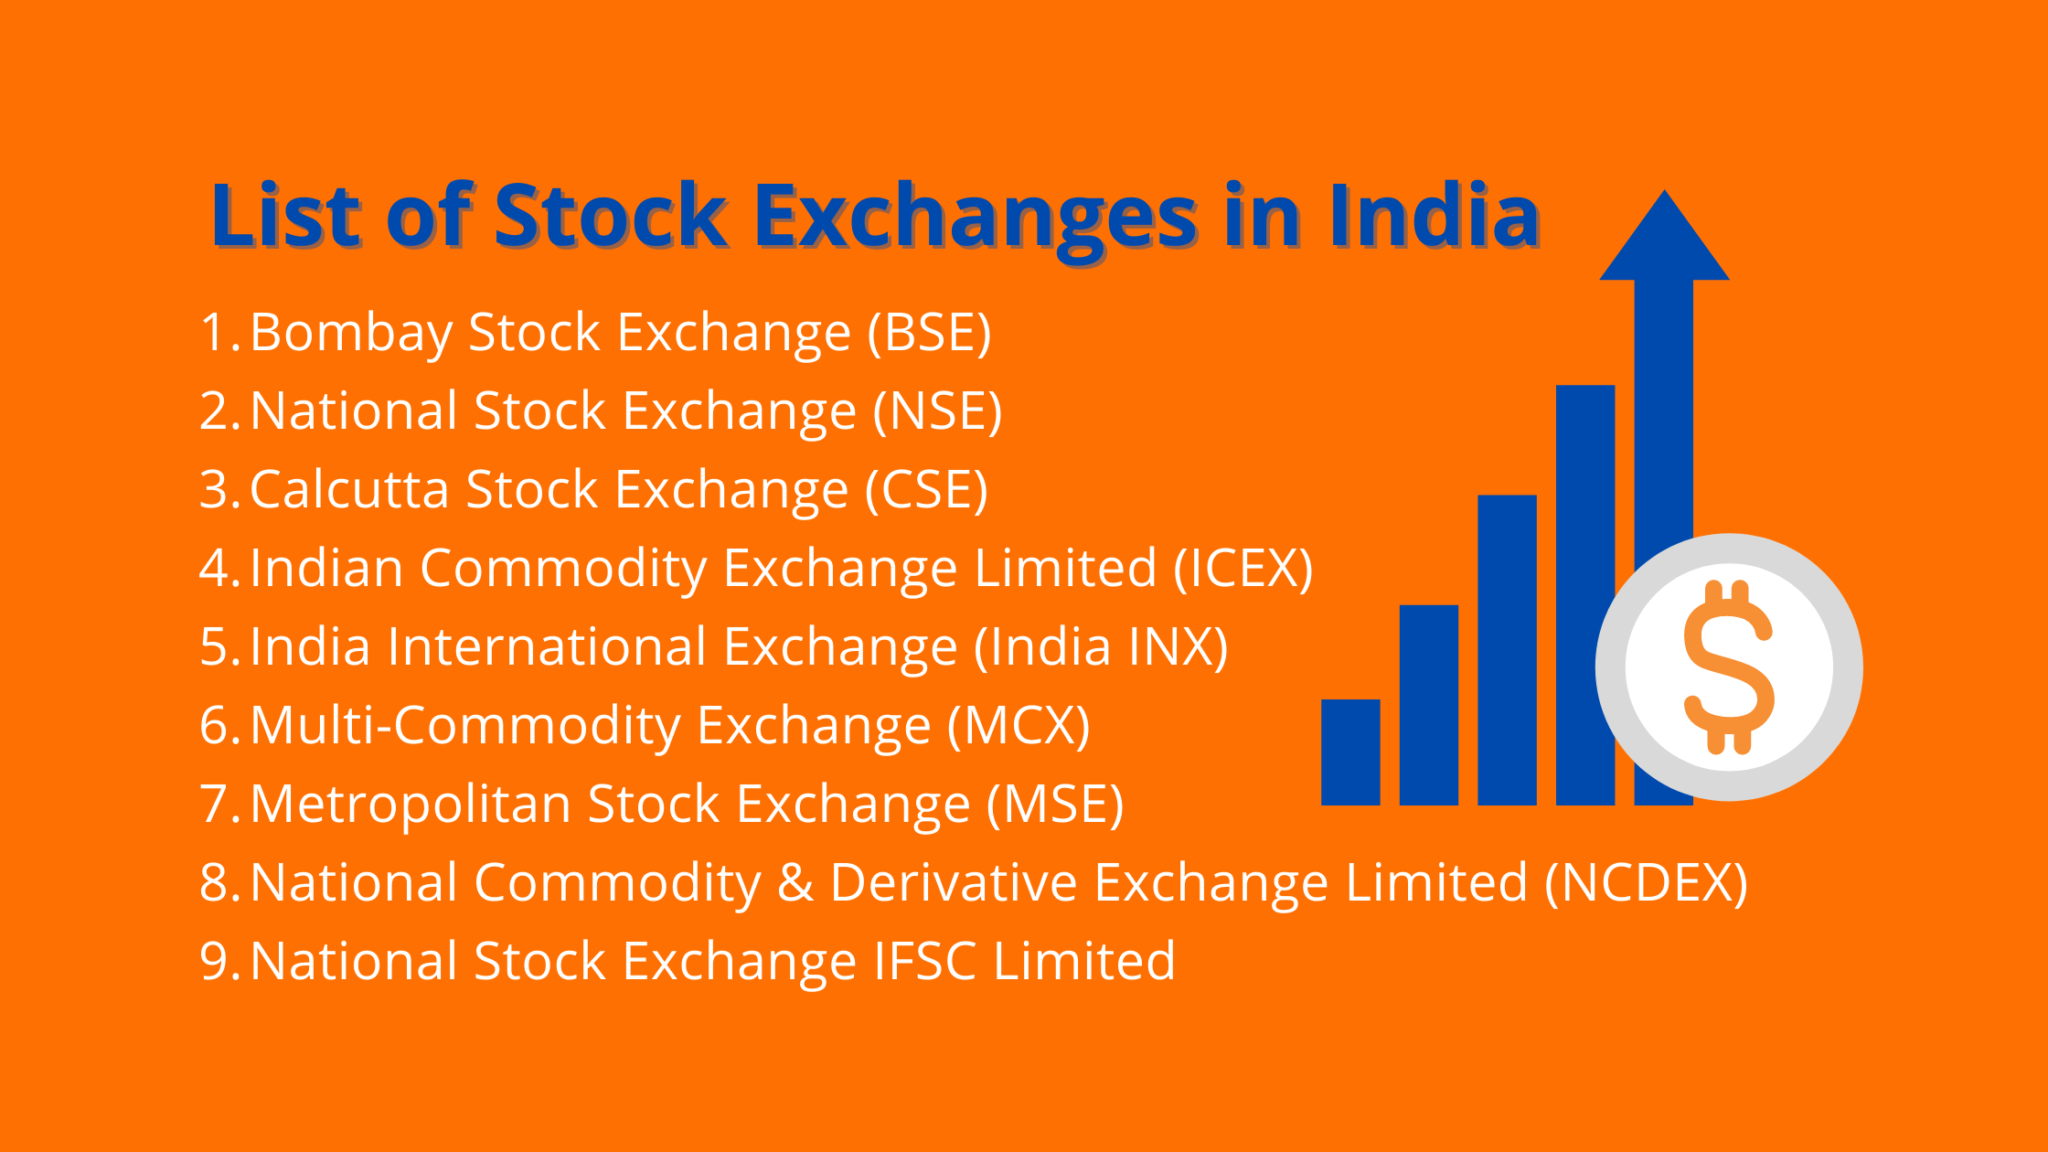 List of Recognized Stock Exchanges in India (2022)